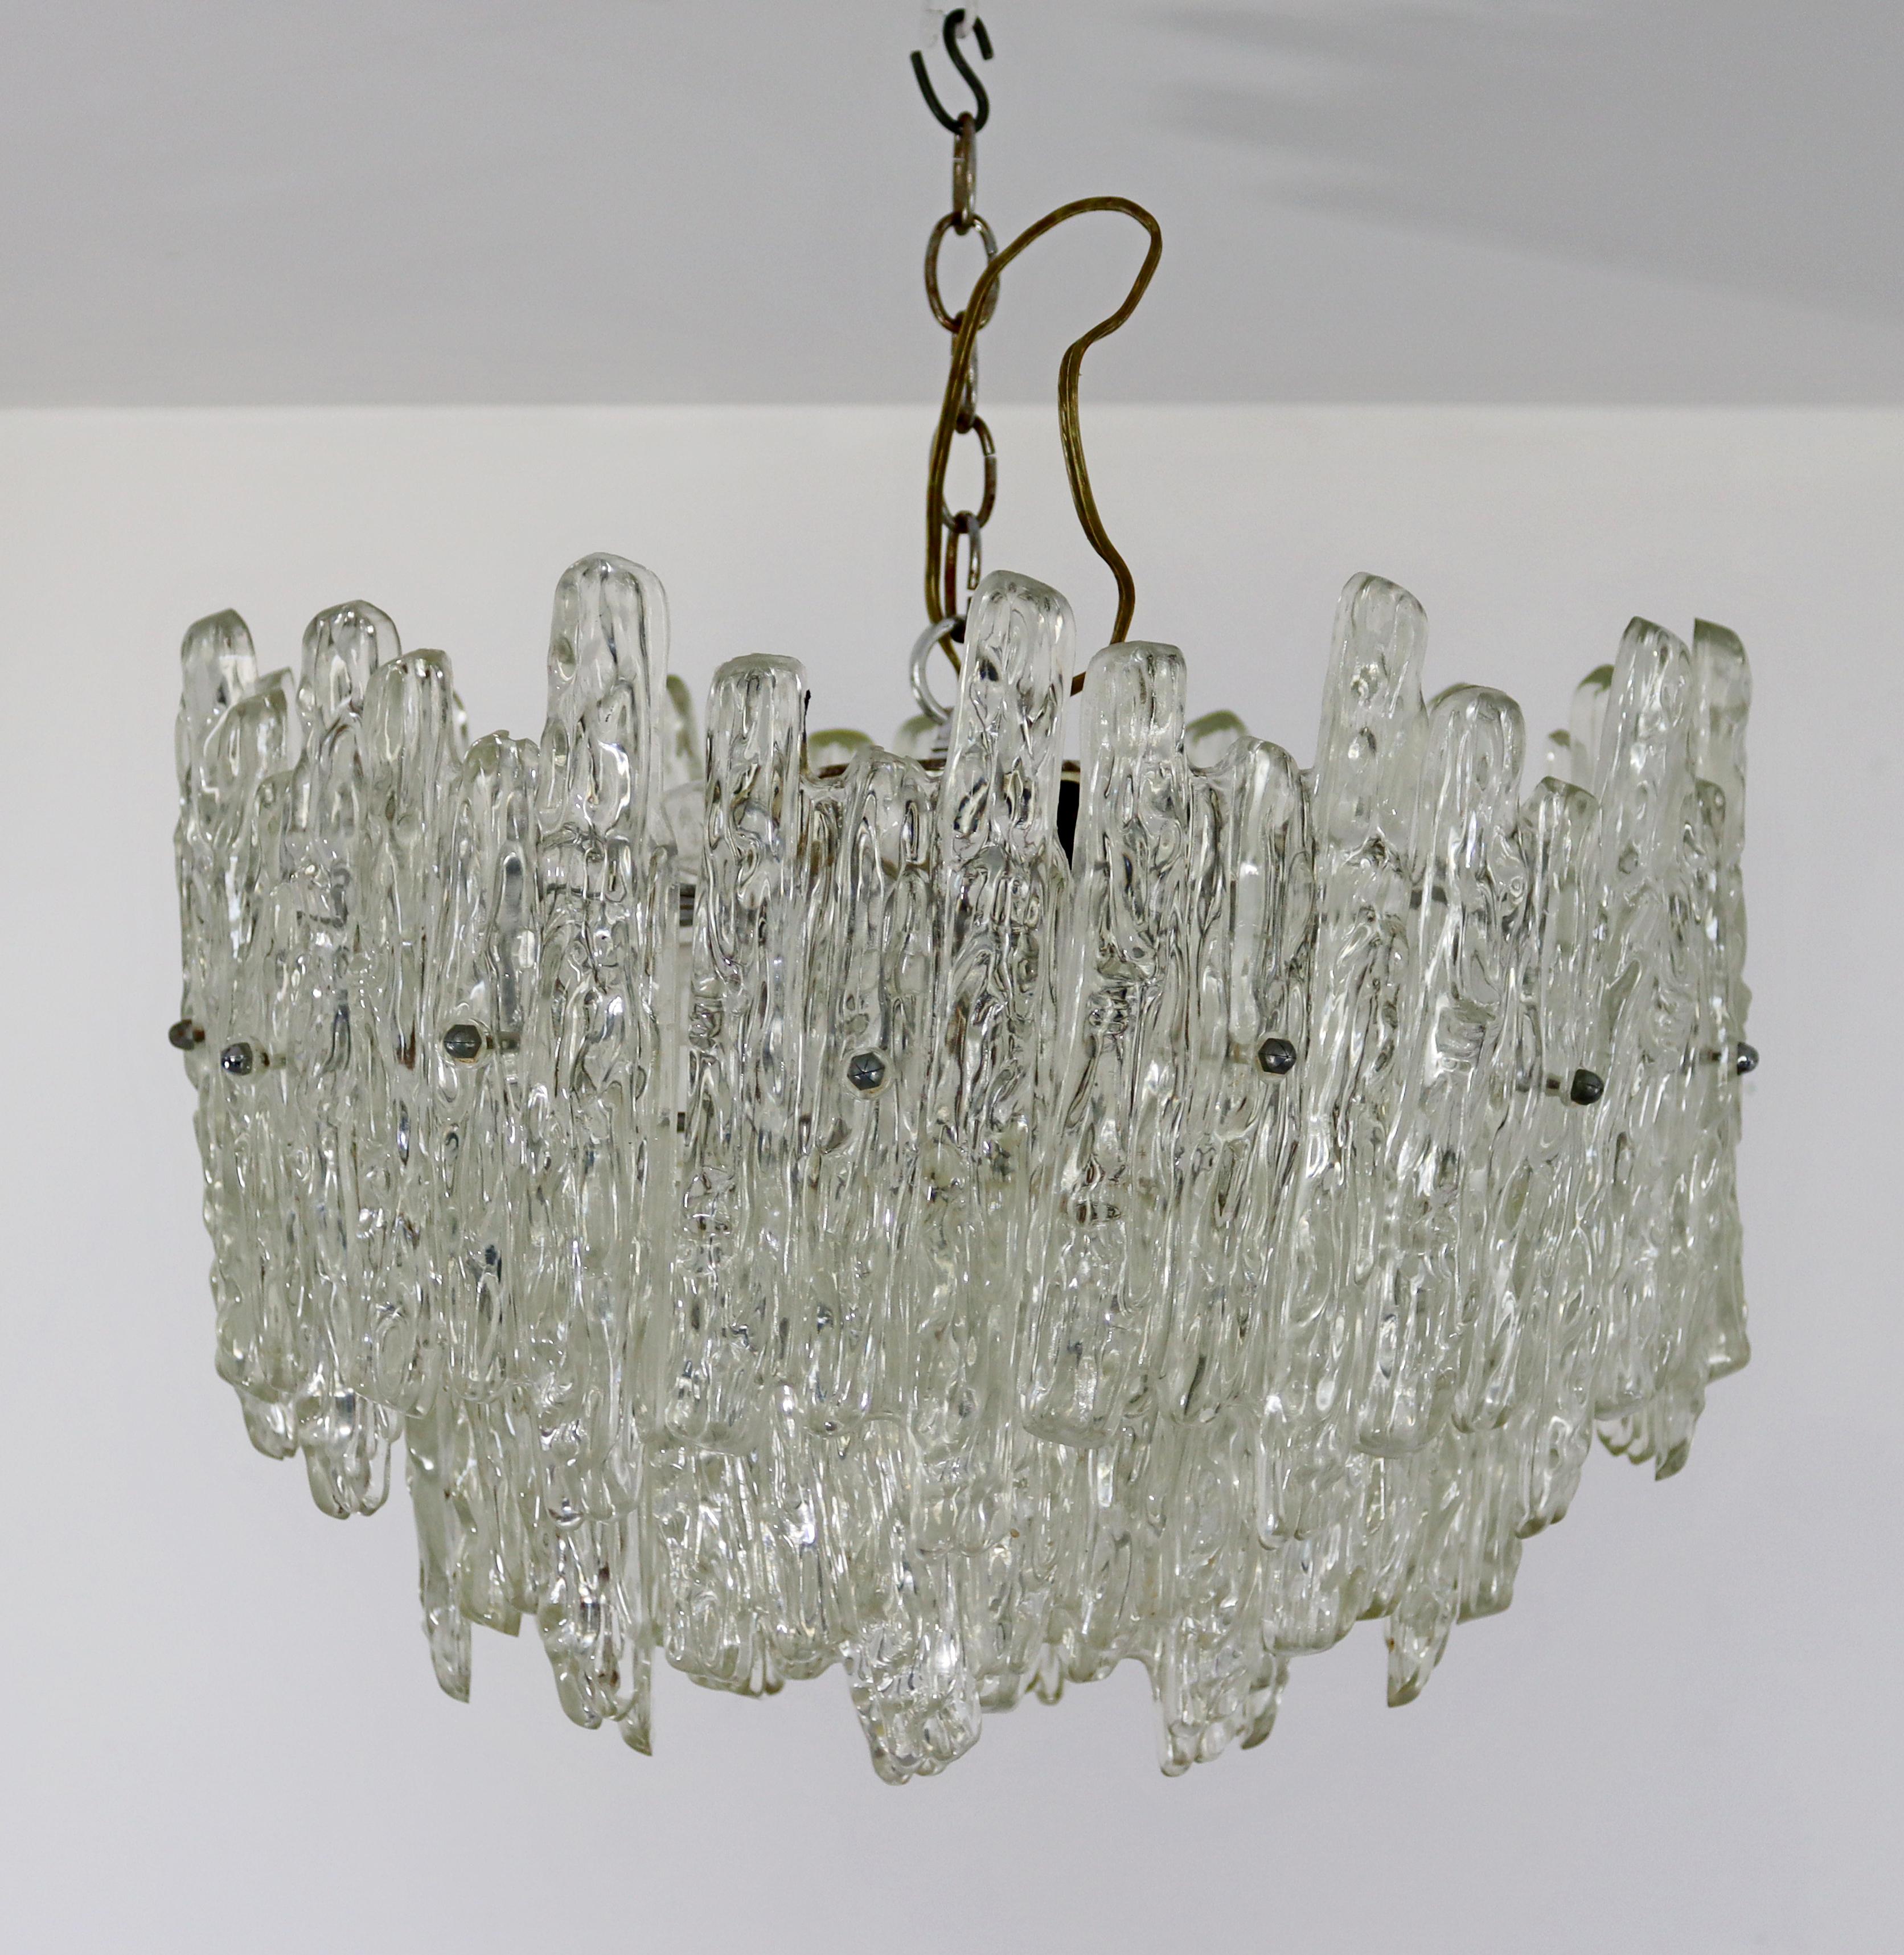 For your consideration is a beautiful and large, Kalmar 3 tier Ice lucite or acrylic, hanging chandelier, circa the 1970s. In very good vintage condition. The dimensions are 17